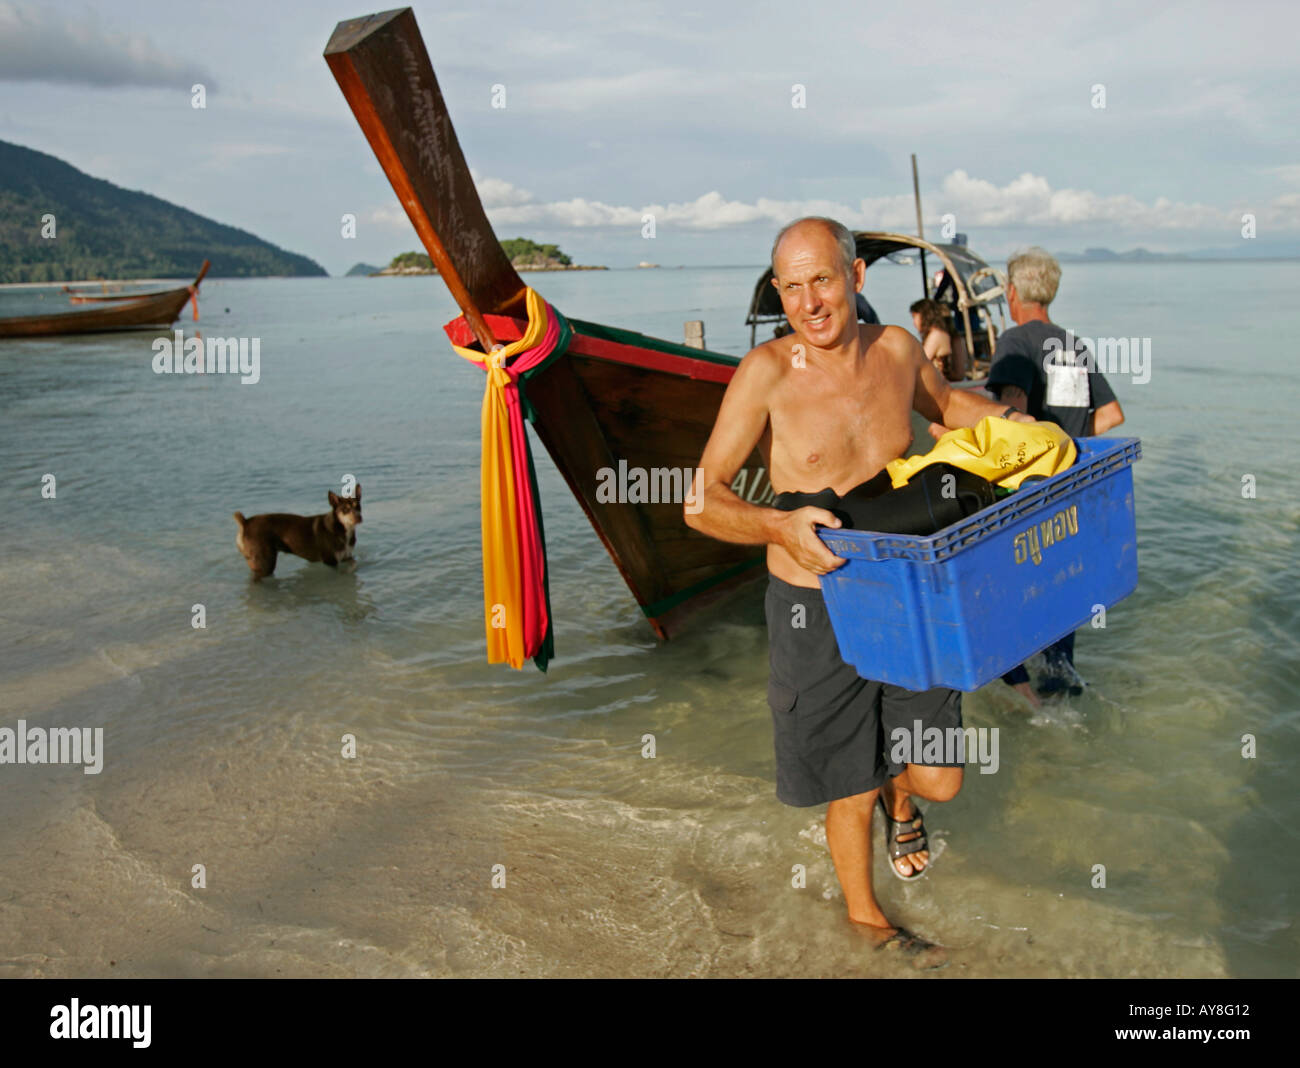 Man carries ashore diving equipment from traditional longtail boat Ko Lipe island Thailand Stock Photo